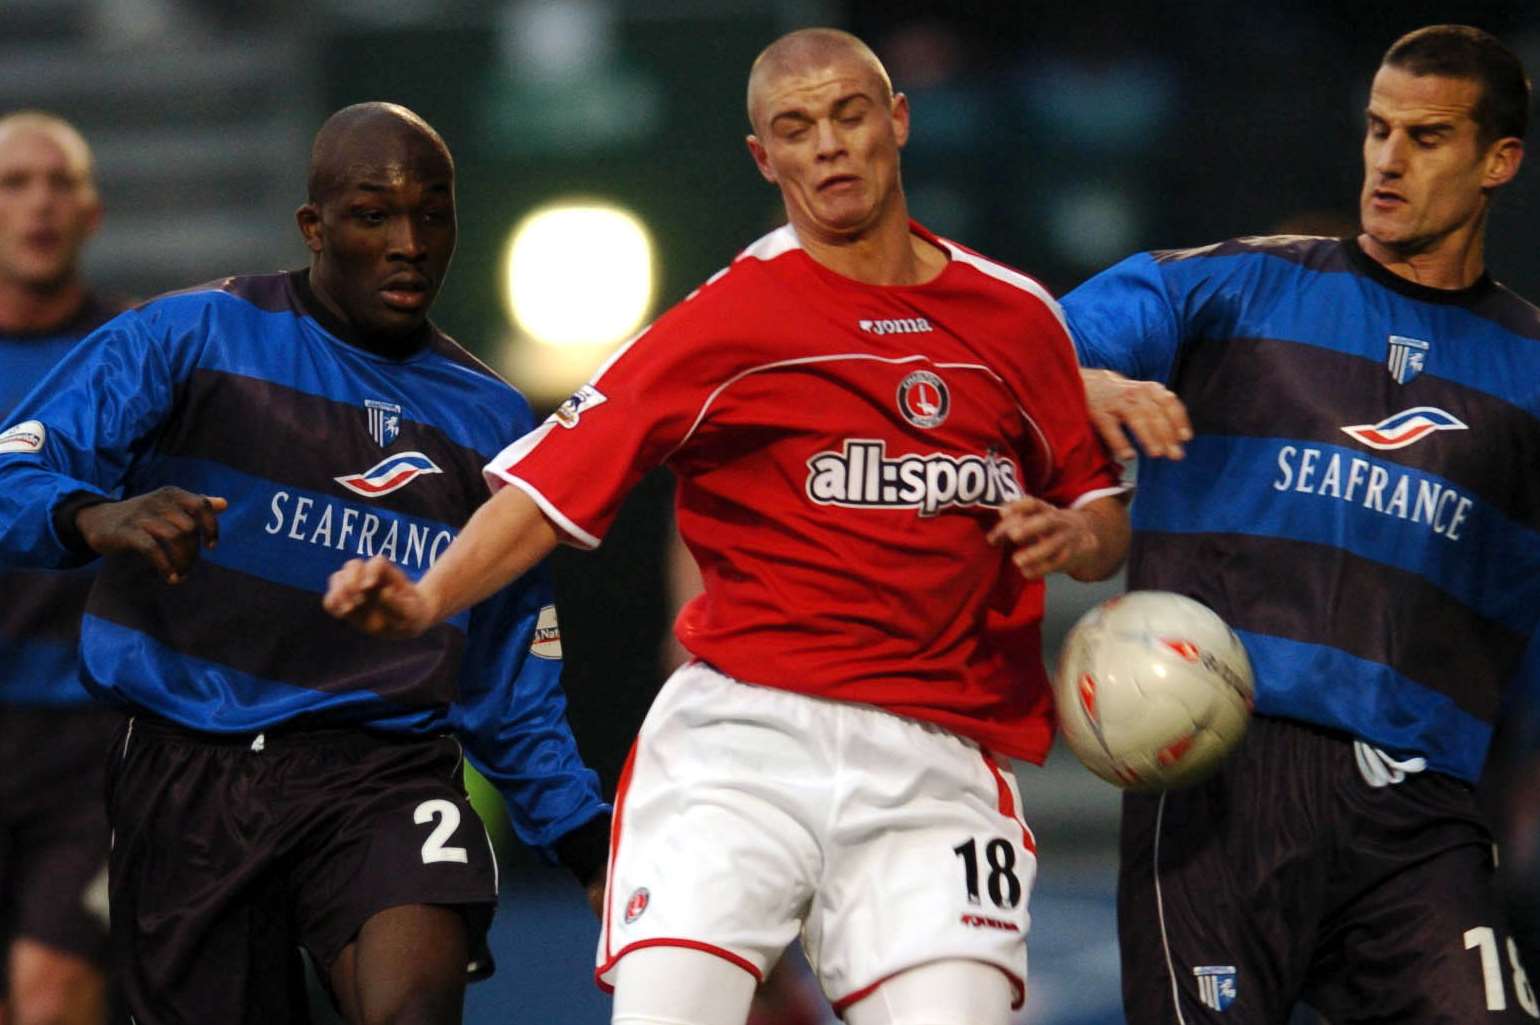 Paul Konchesky, centre, challenges Gillingham's Nyron Nosworthy and Chris Hope while playing for Charlton